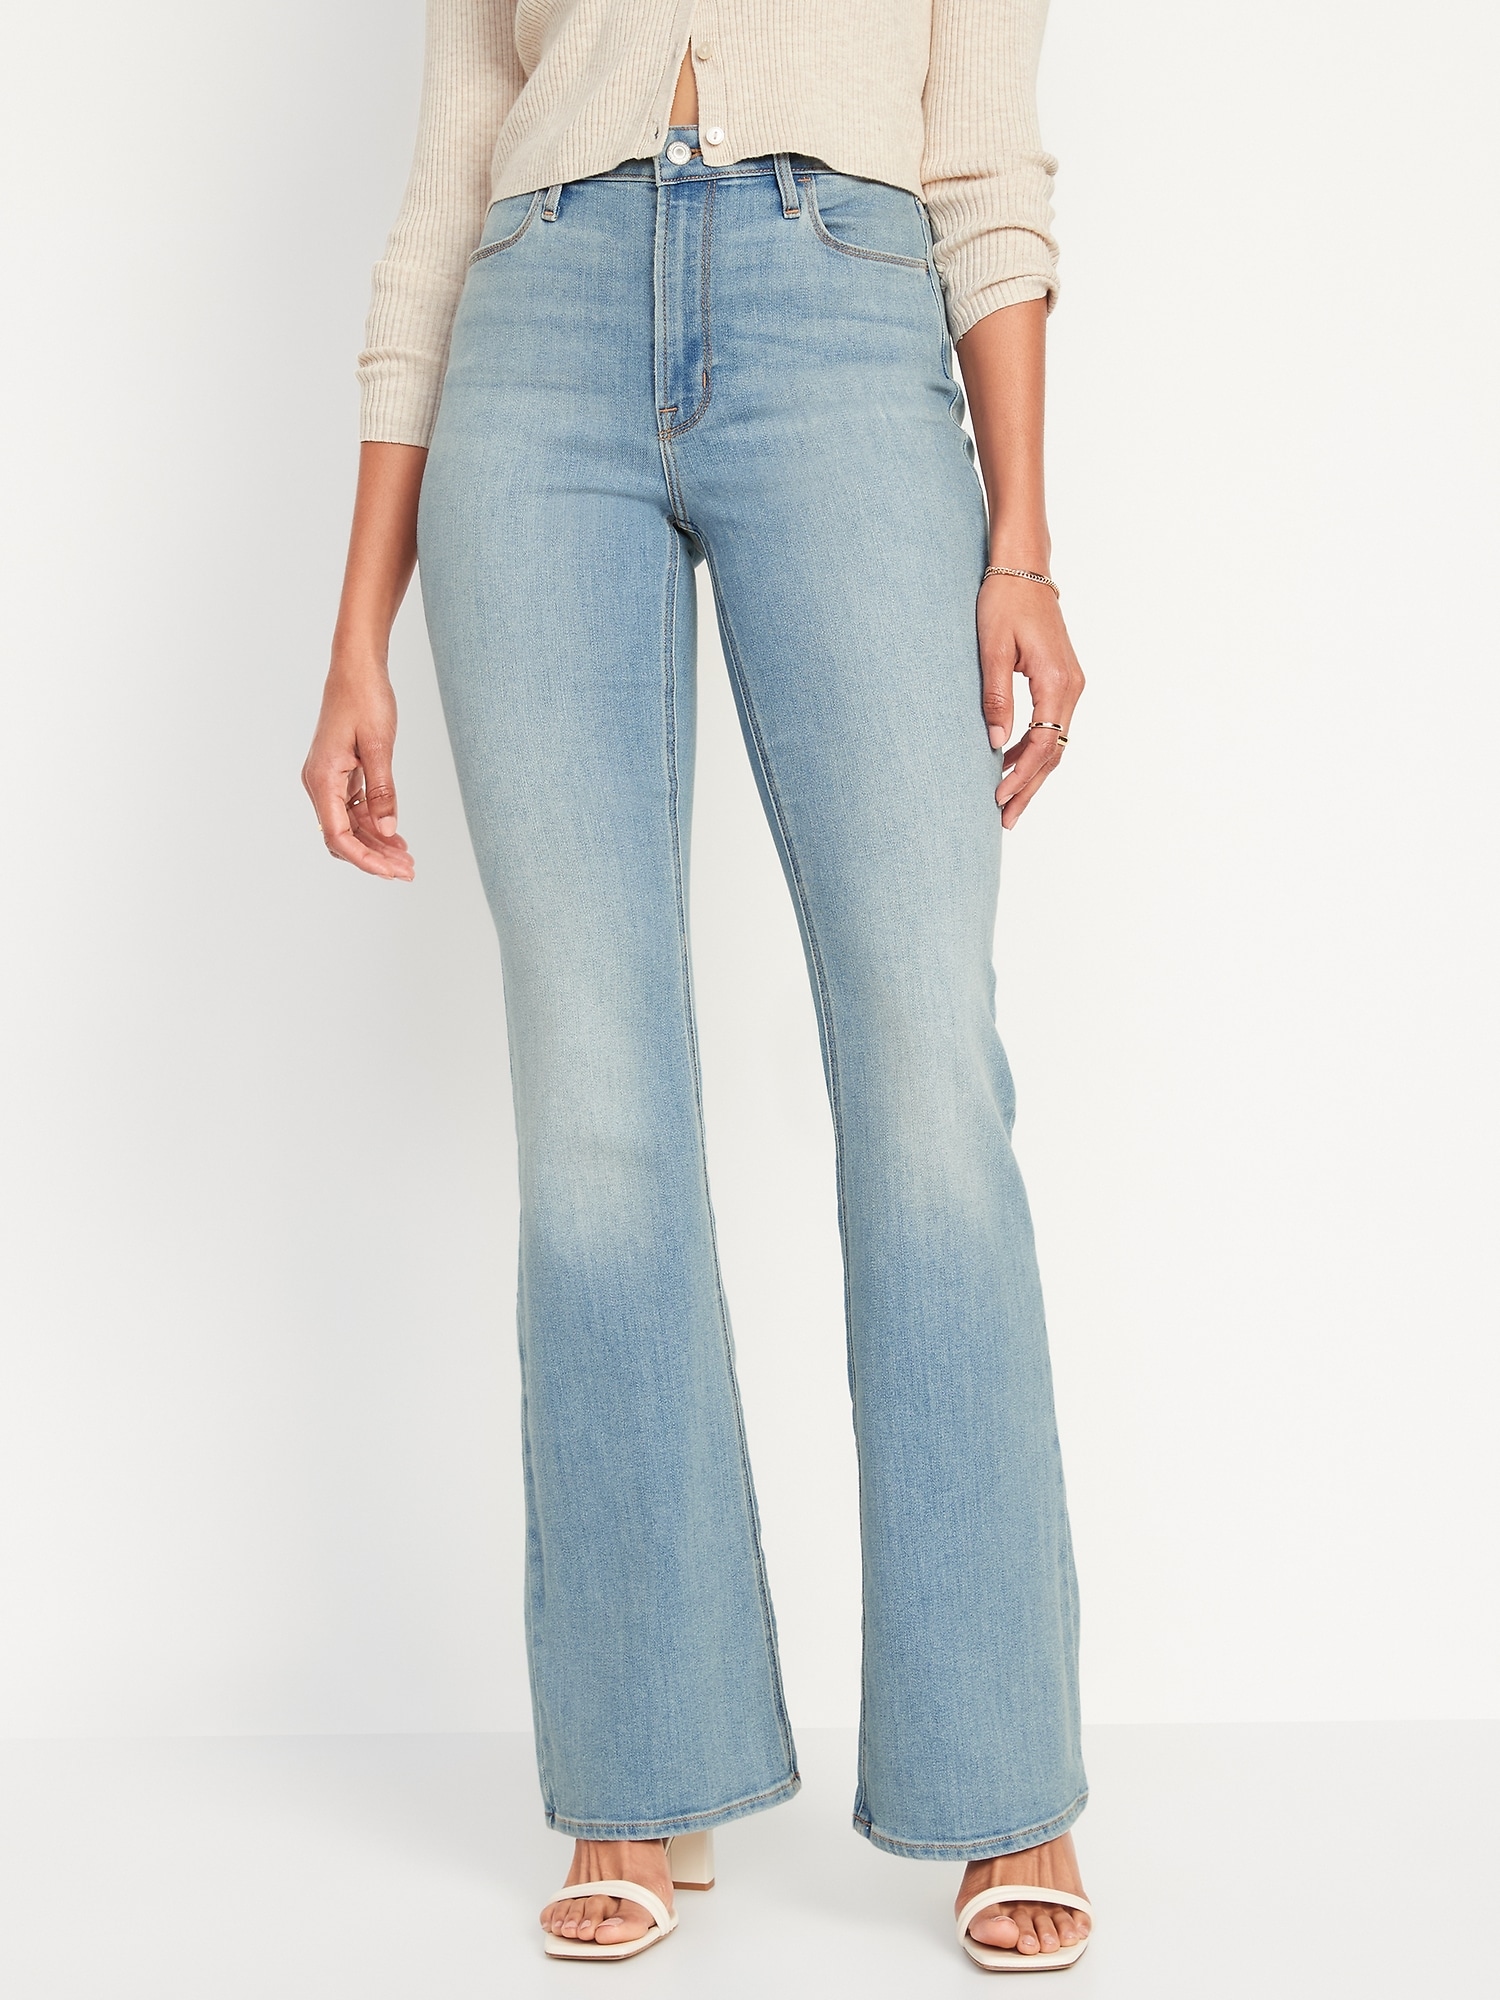 Old Navy High Rise Flare Jeans Blue Size 14 - $27 (40% Off Retail